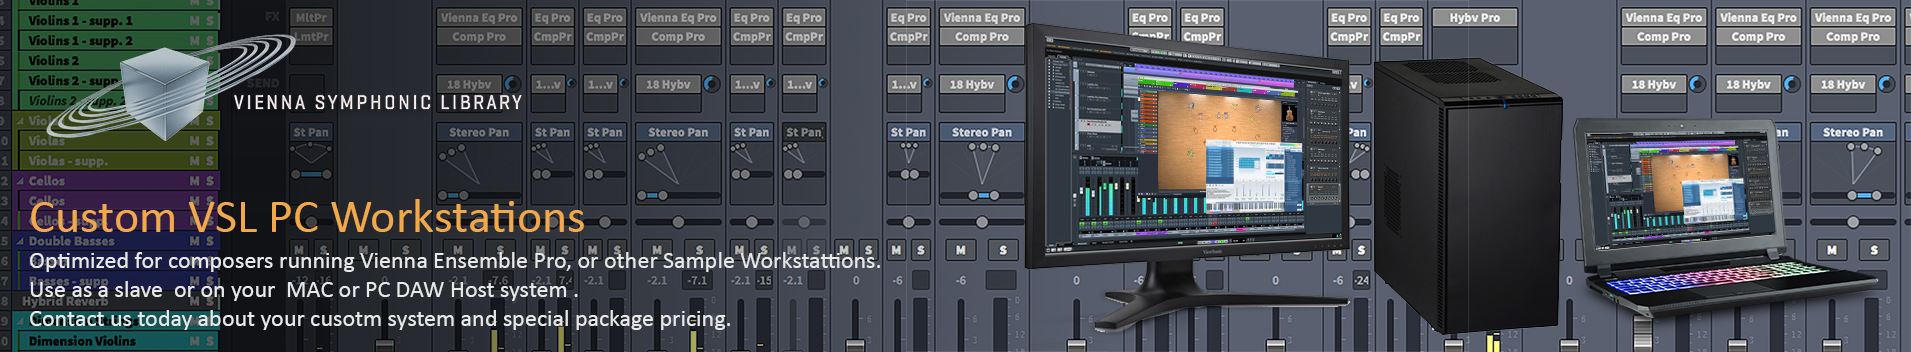 Vienna Ensemble Pro Optimized Workstations and Slave Systems The ultimate composer solution. Contact Us today to configure your system.  Special bundle pricing available